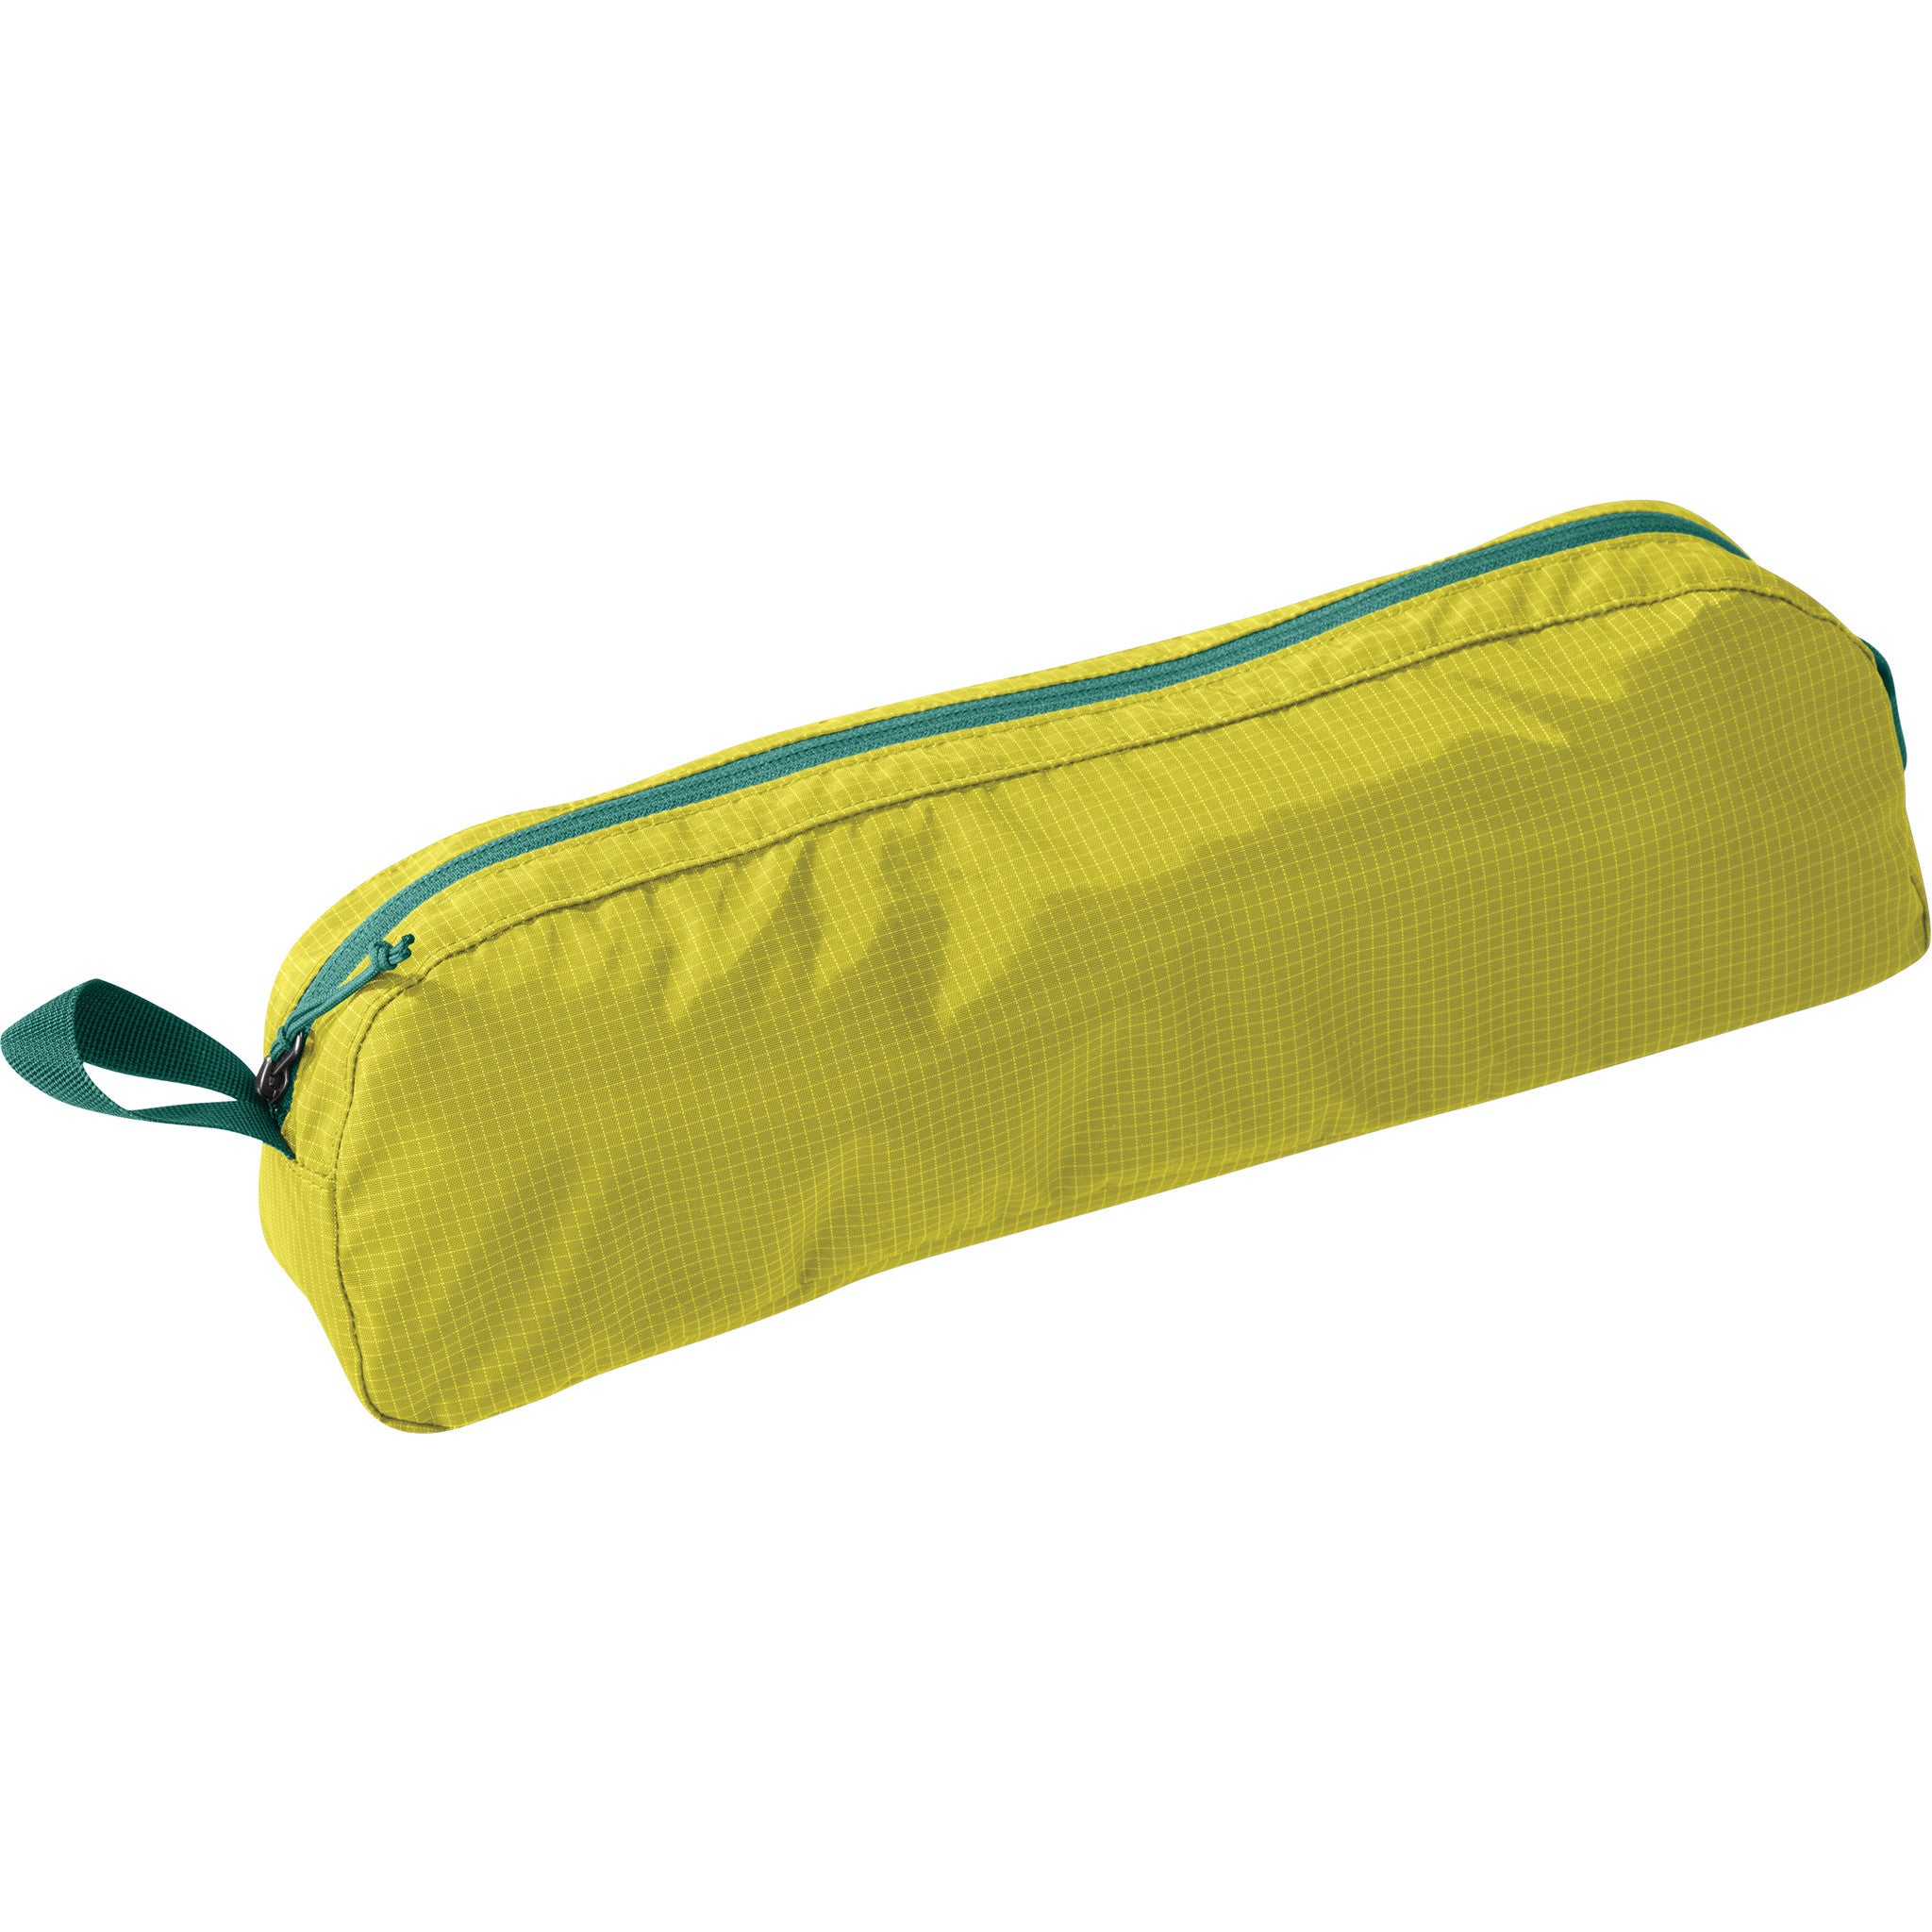 Thermarest - UltraLite Cot